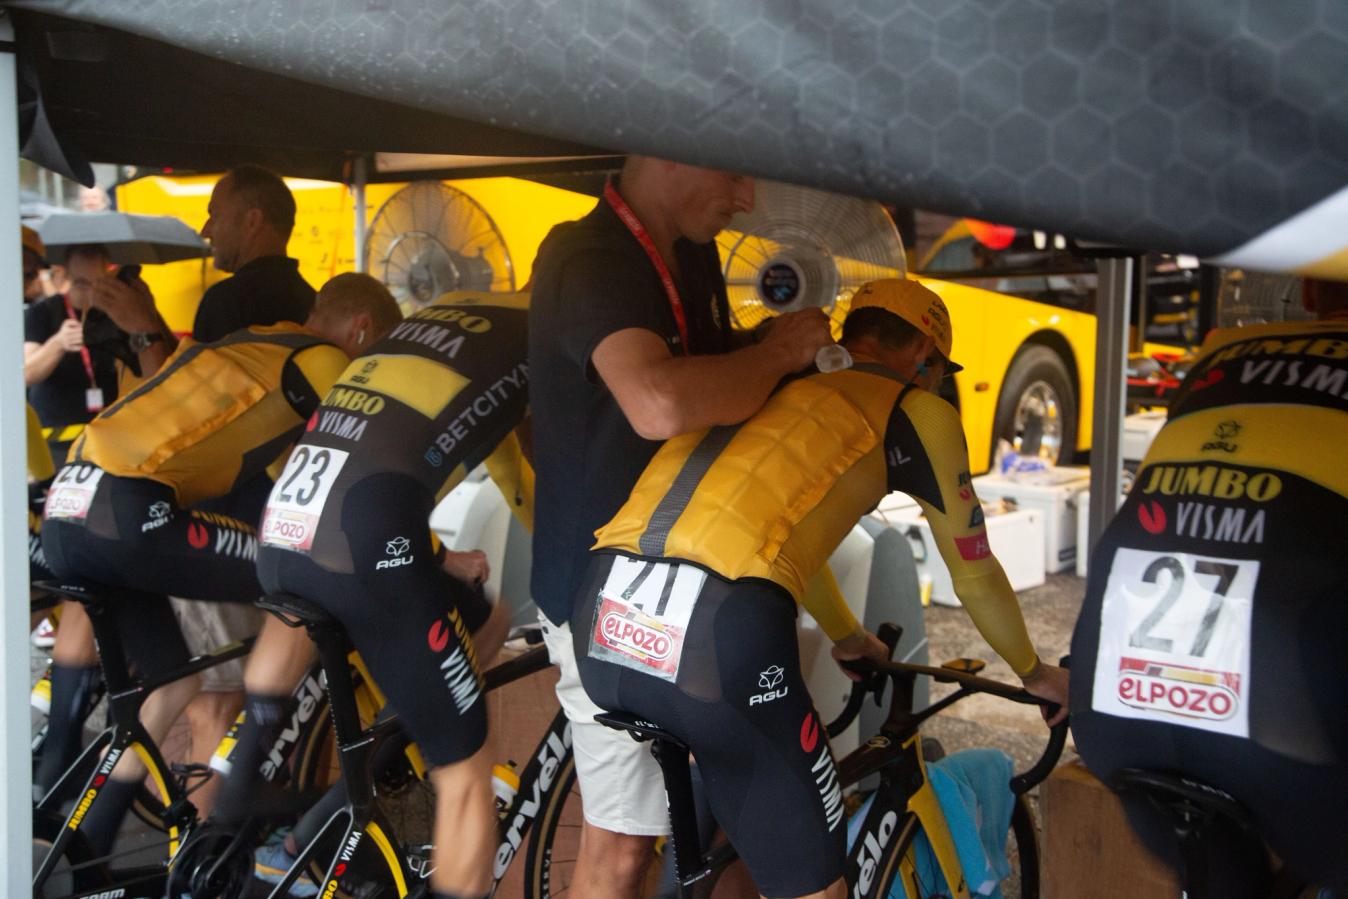 Jumbo-Visma's riders used cooling vests ahead of the opening stage